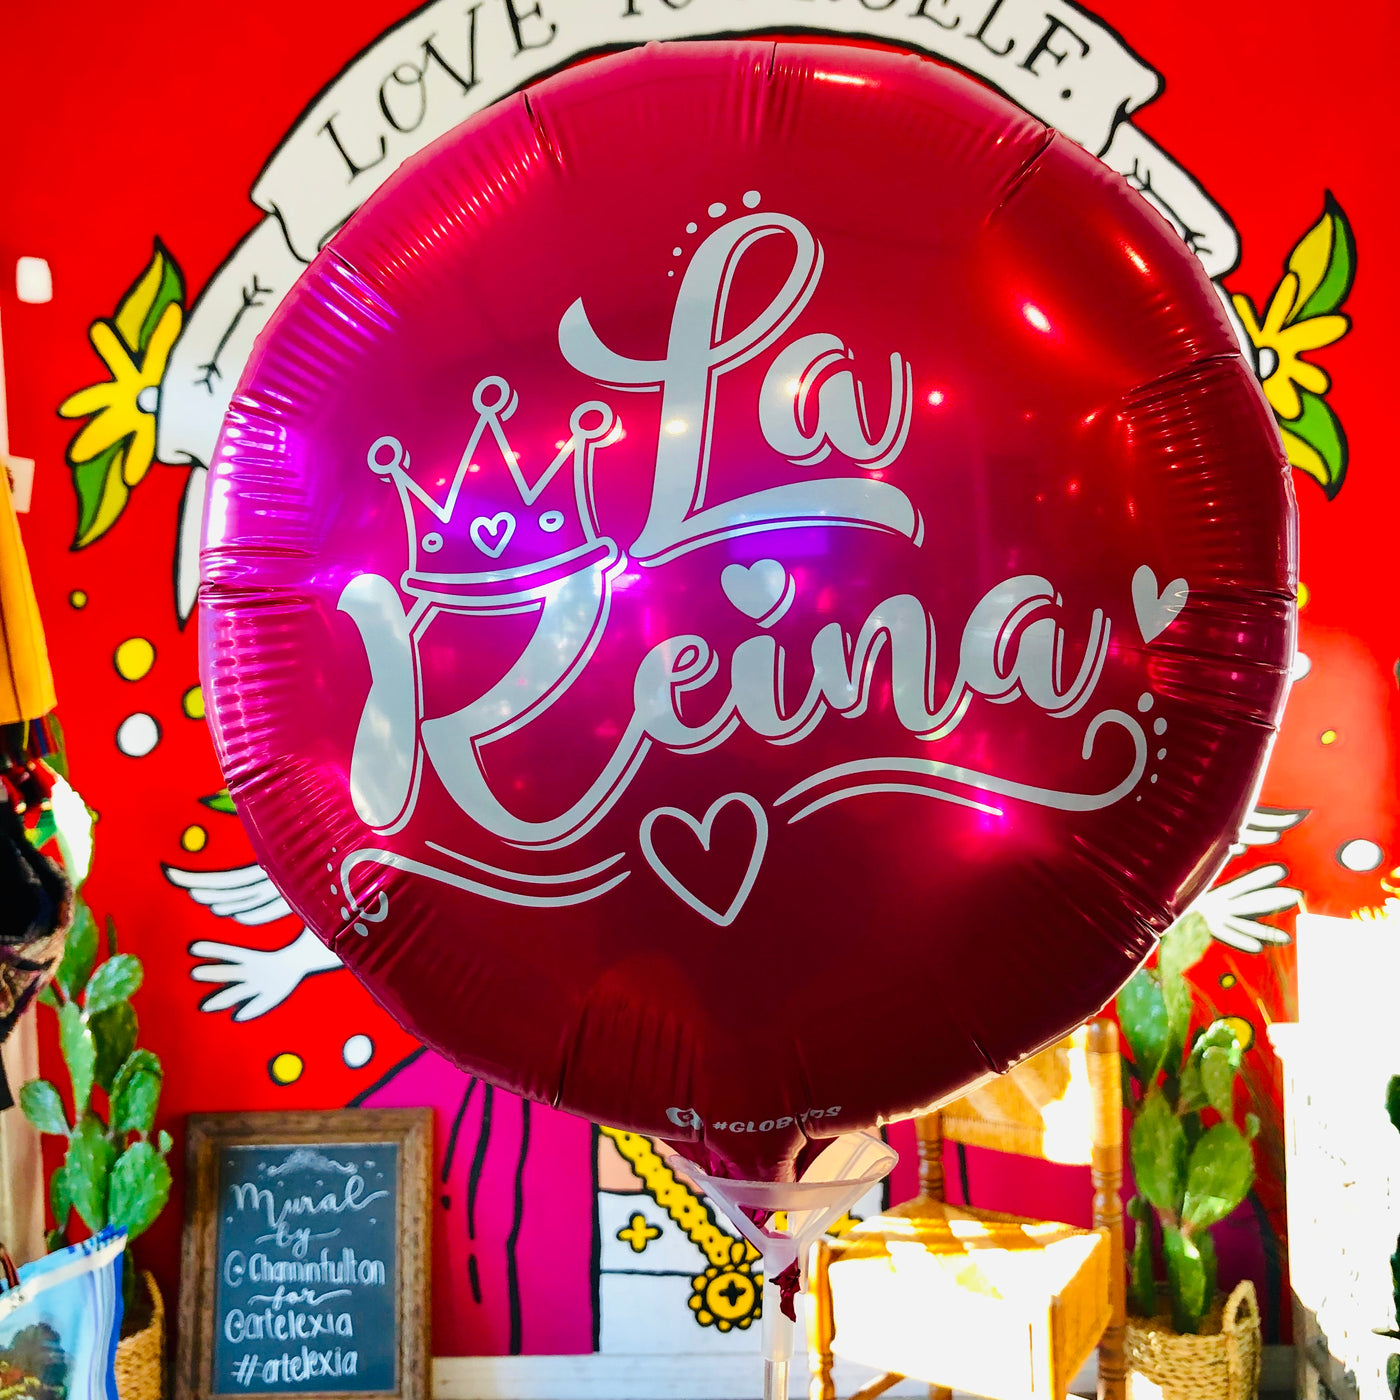 Hot pink mylar balloon with the words "La Reina" and a crown detailing on it.